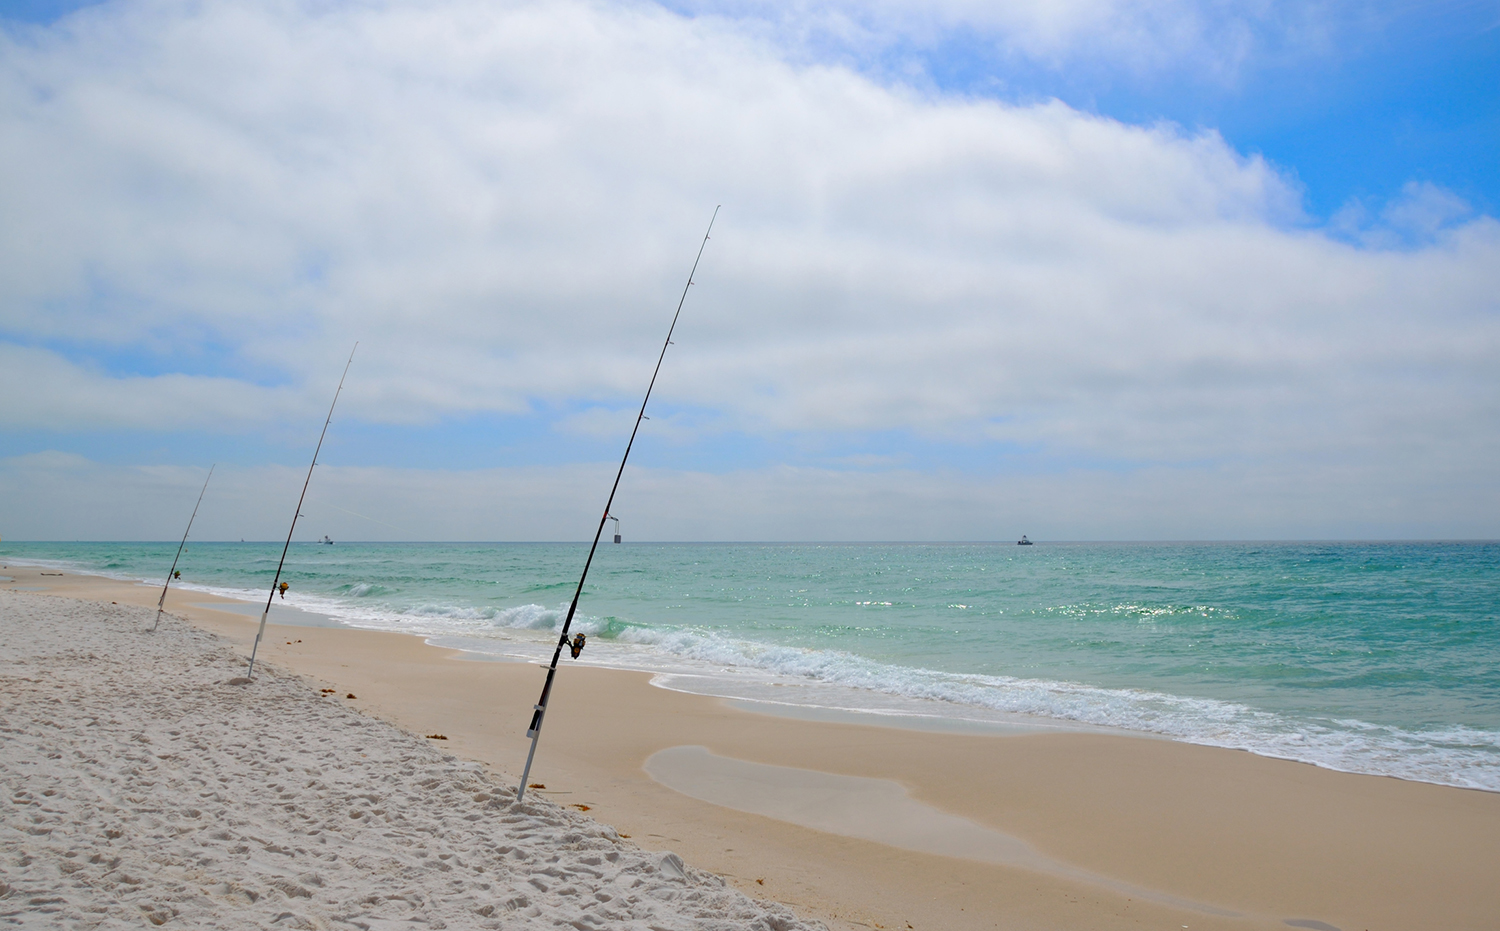 Fishing poles planted in the sand.